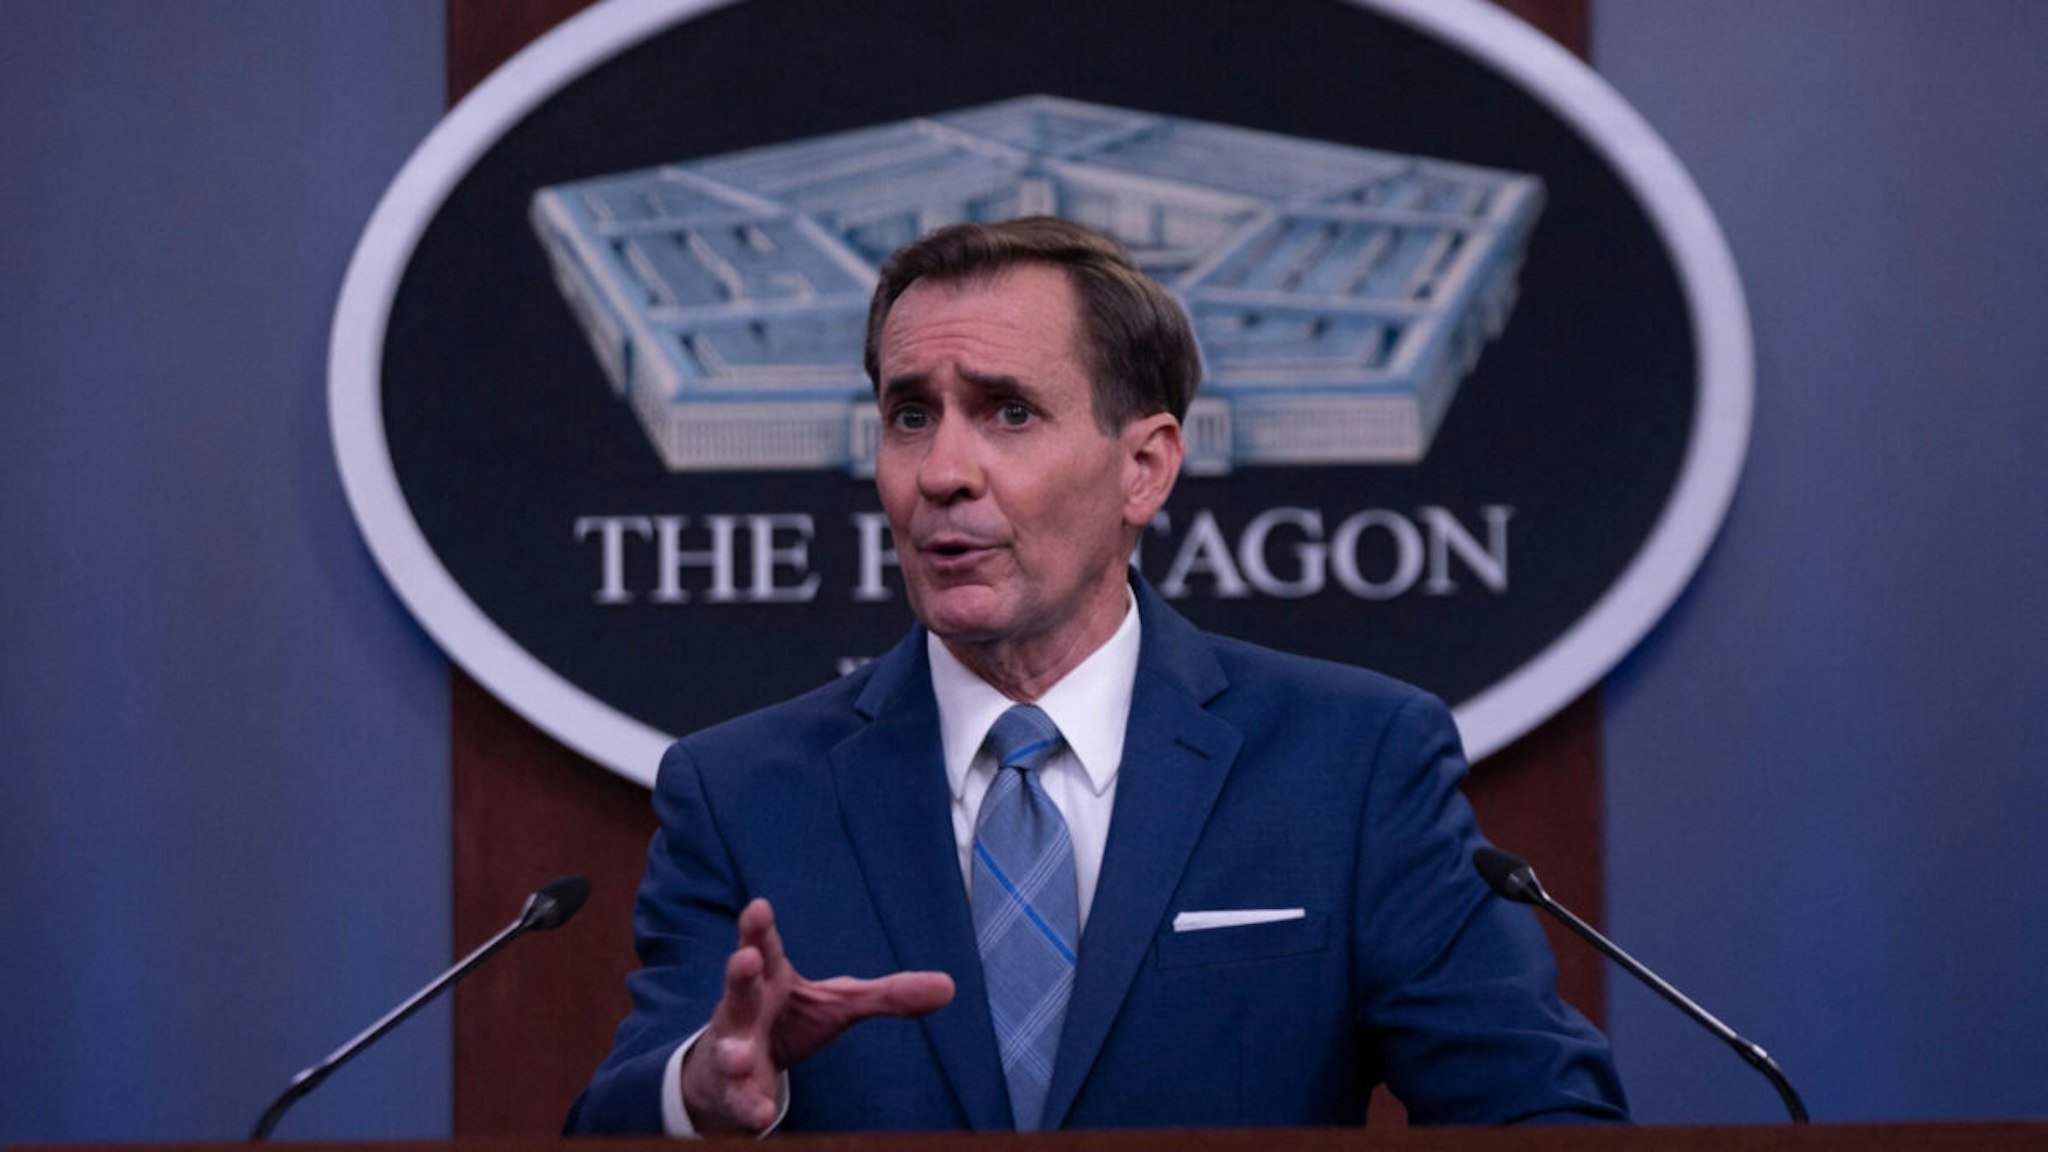 Pentagon Spokesman John Kirby speaks during a press briefing on the situation in Afghanistan at the Pentagon in Washington, DC on August 16, 2021.